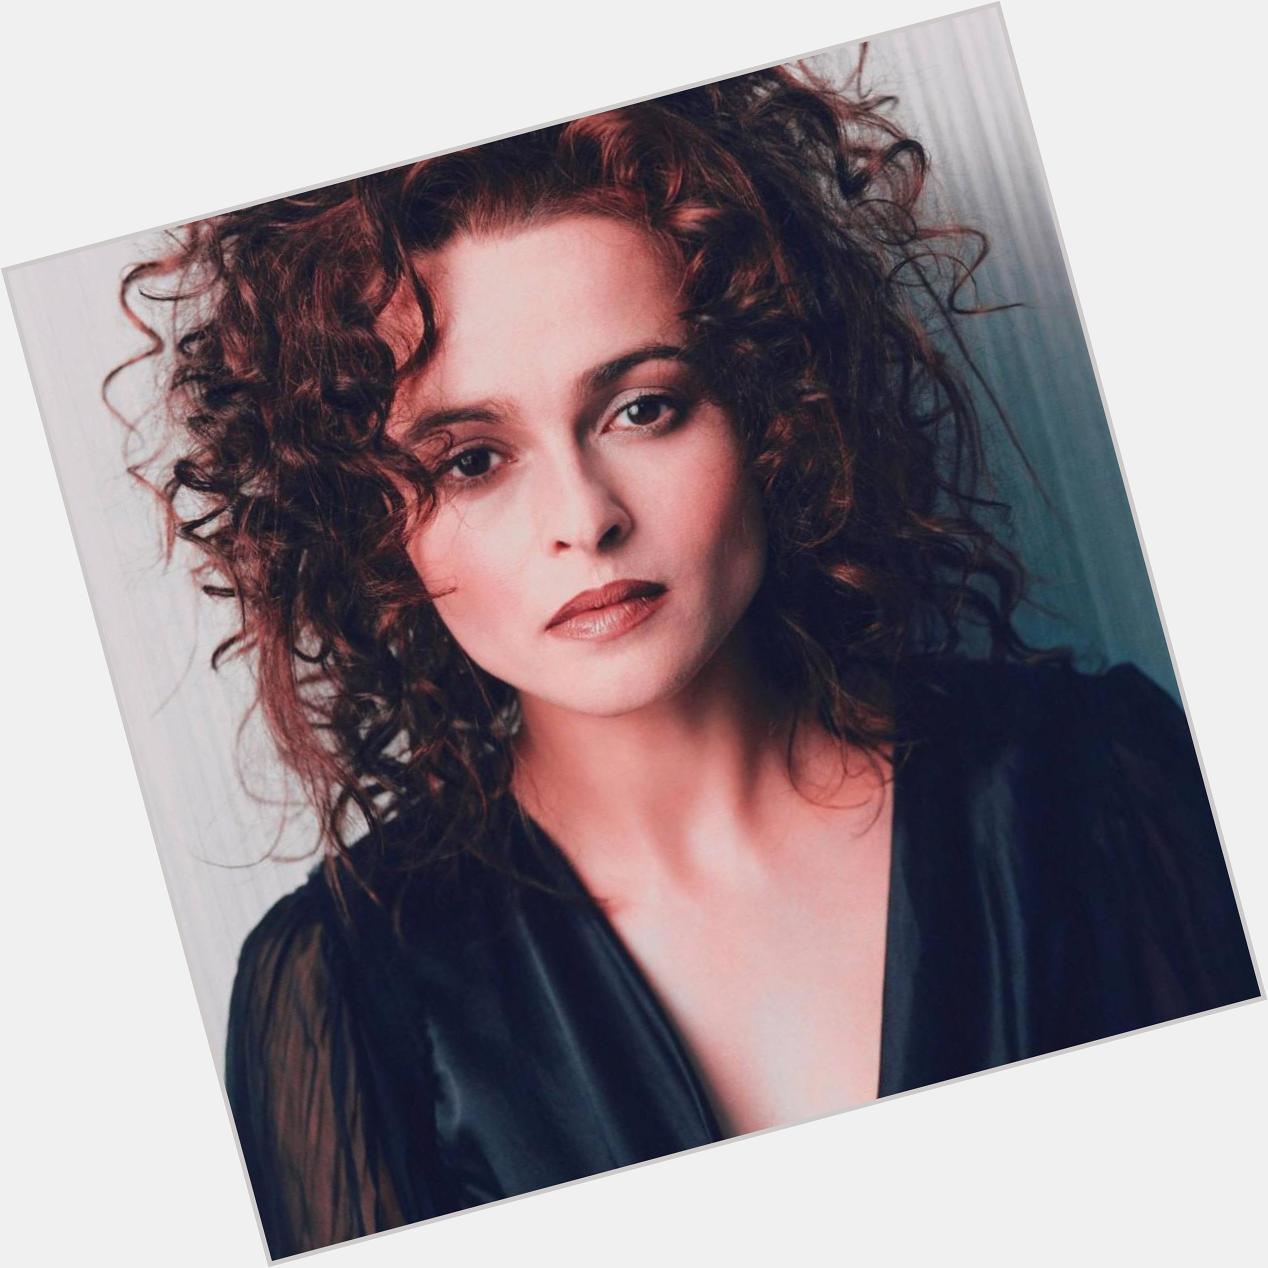 A special happy bday to the one & only Helena Bonham Carter  her talent is so inspiring 